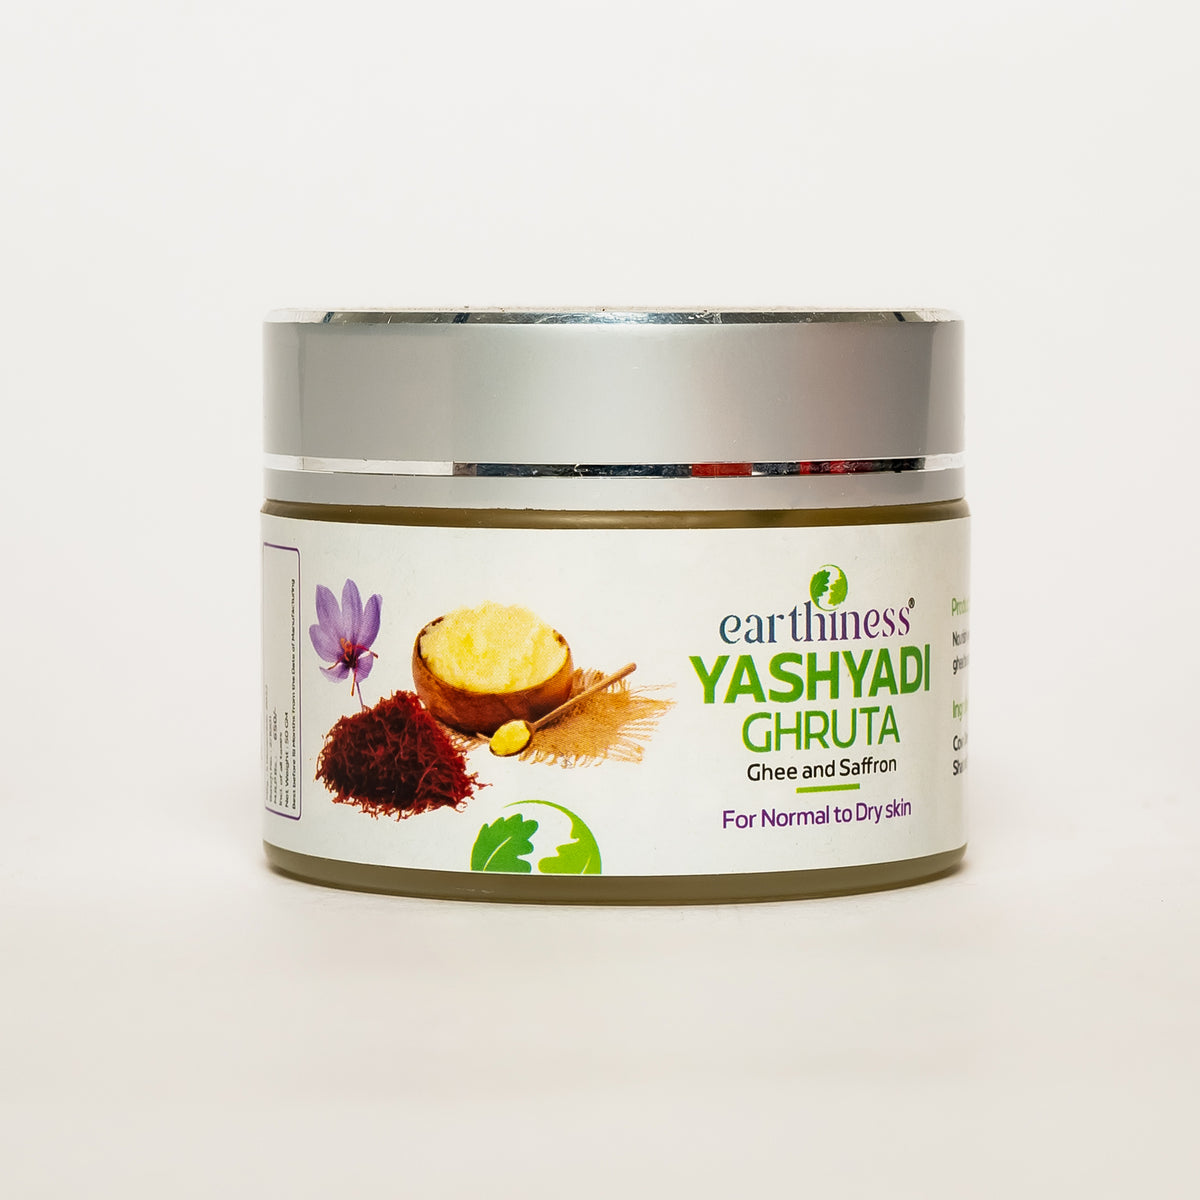 Yashyadi Ghruta with 100 Times Washed Cow's Ghee & Saffron To Pamper Your Skin Naturally